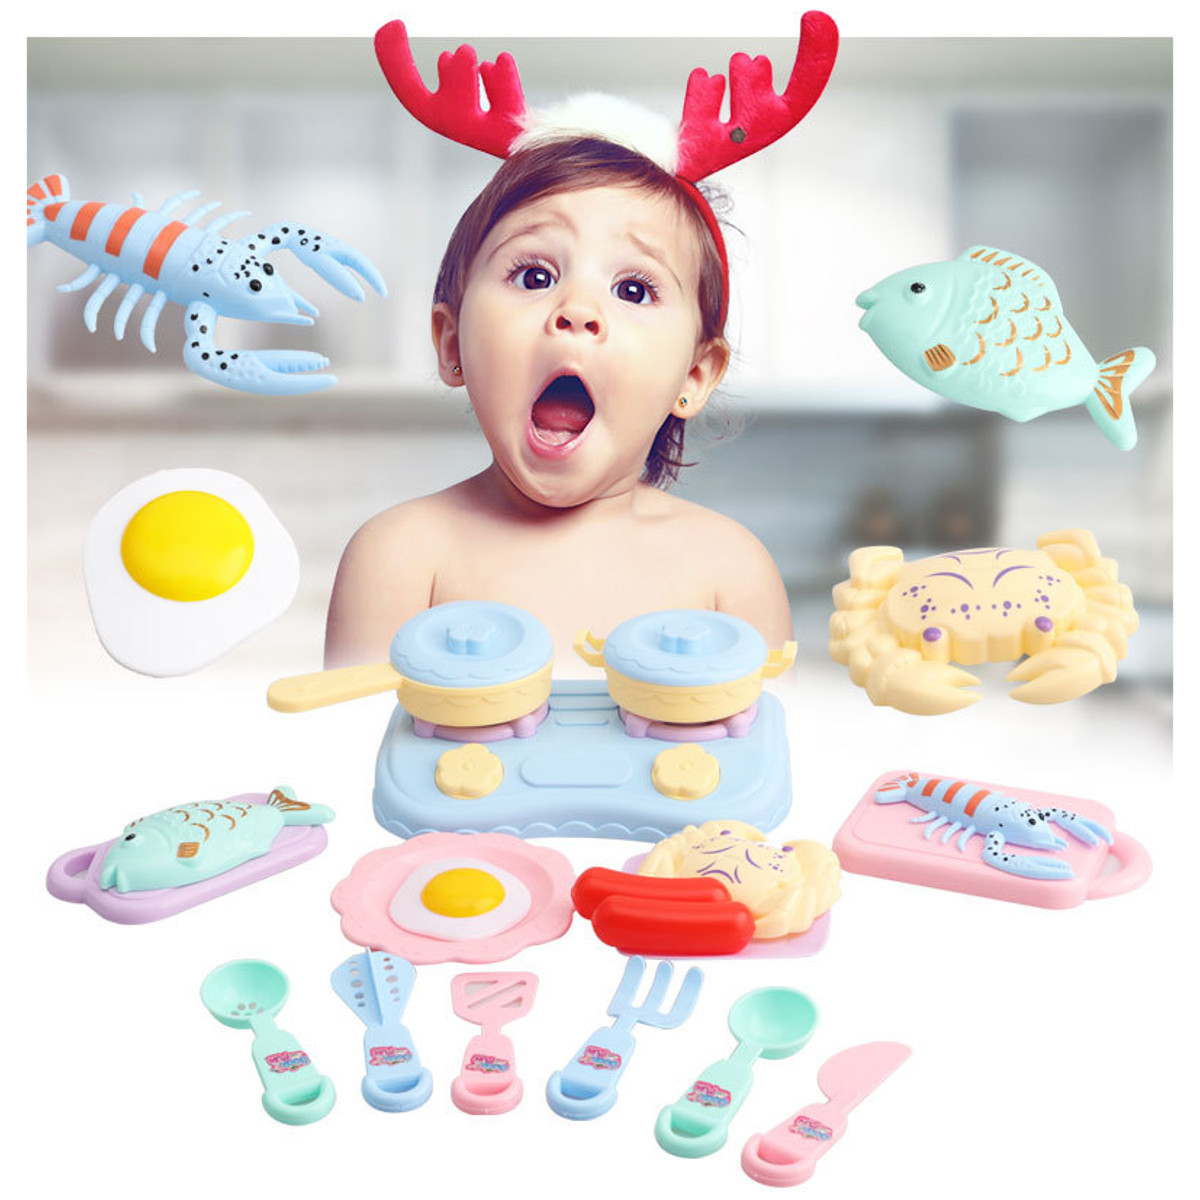 Kids-DIY-Kitchen-Play-Toys-Simulation-Kitchen-Role-Play-Children-Cooking-Toys-Gift-1842324-5